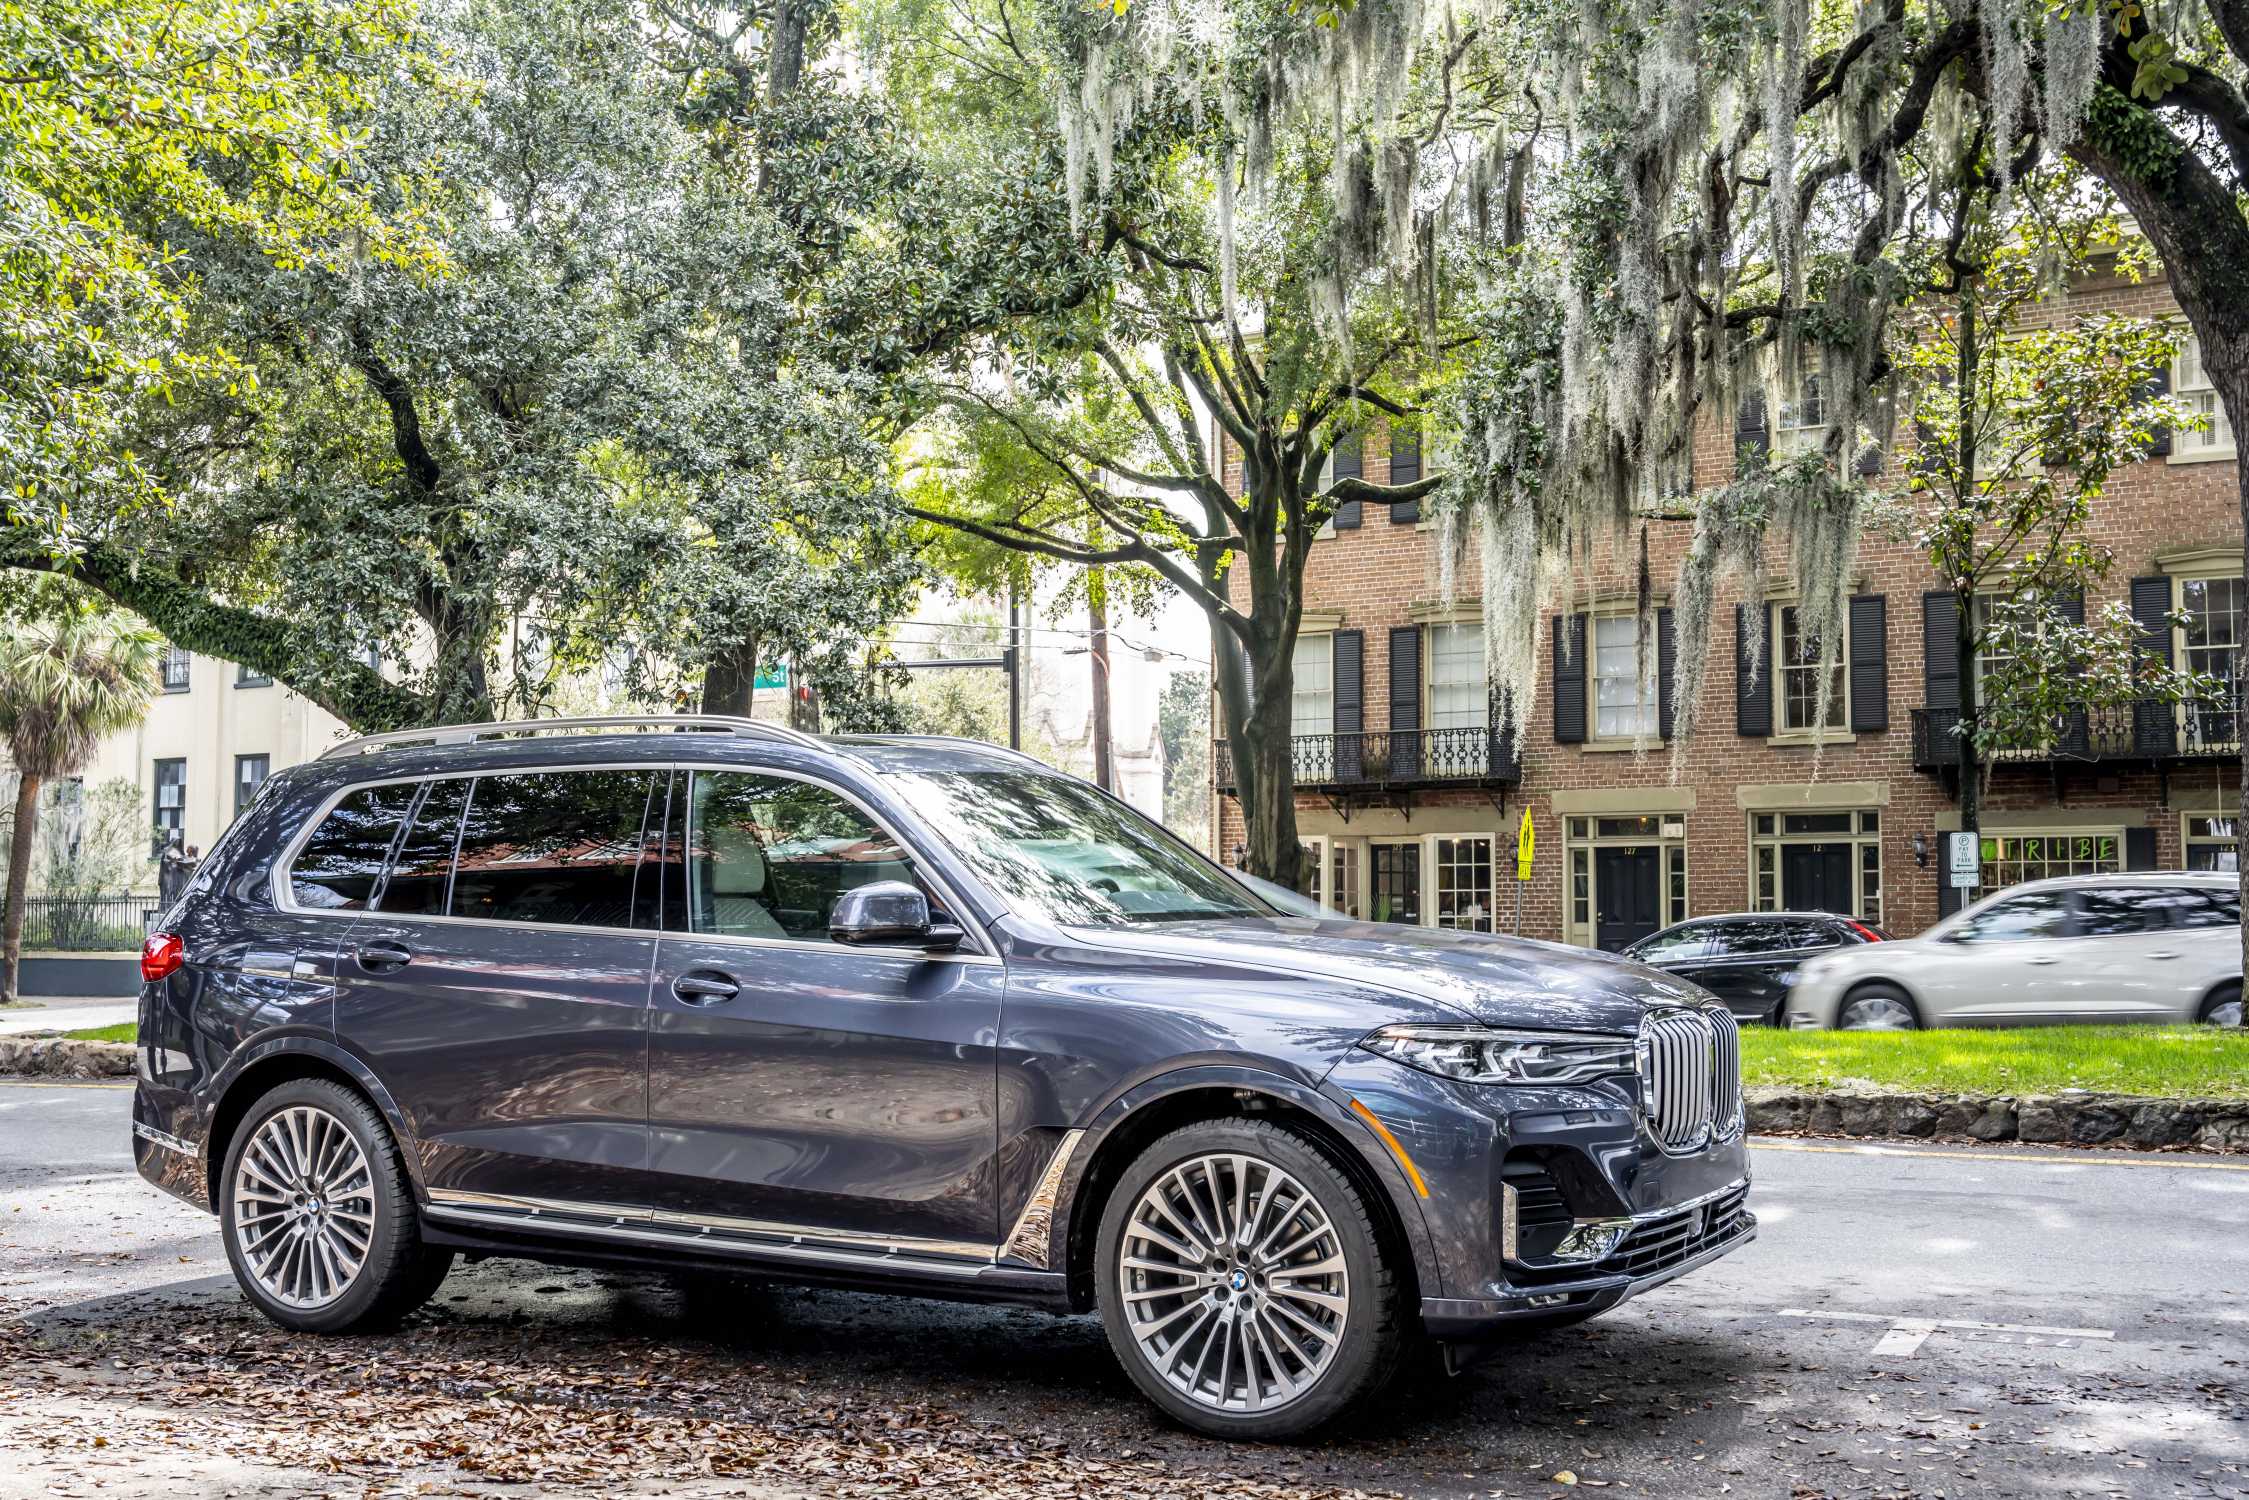 The first-ever BMW X7 (03/2019).